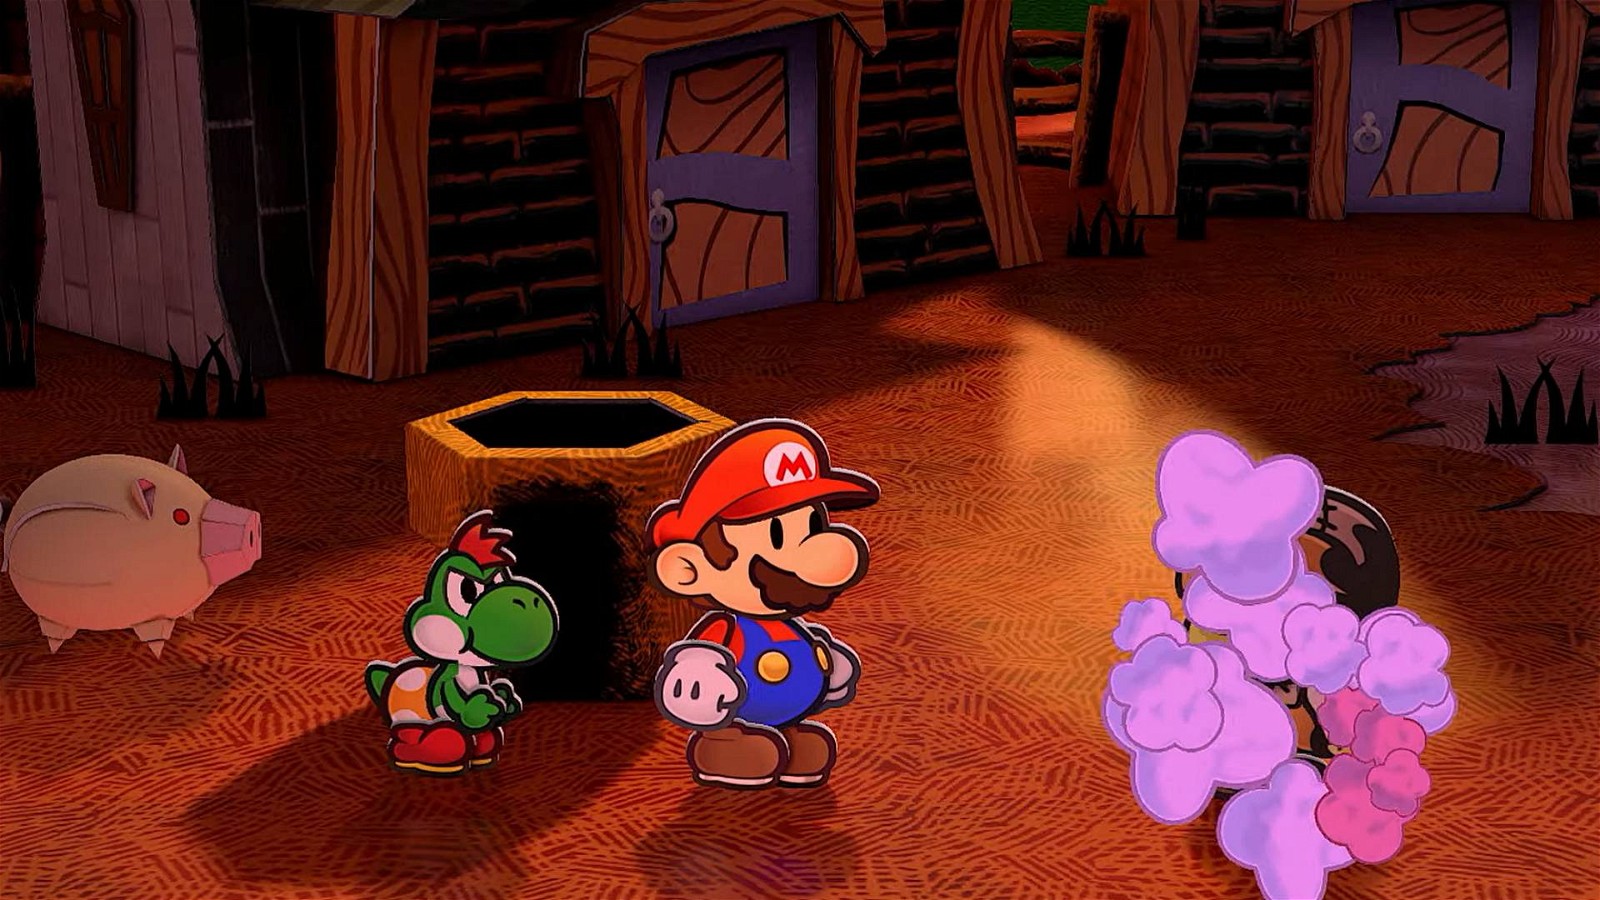 Paper Mario: The Thousand-Year Door gets a new trailer at Nintendo Direct and will be released in 2024.